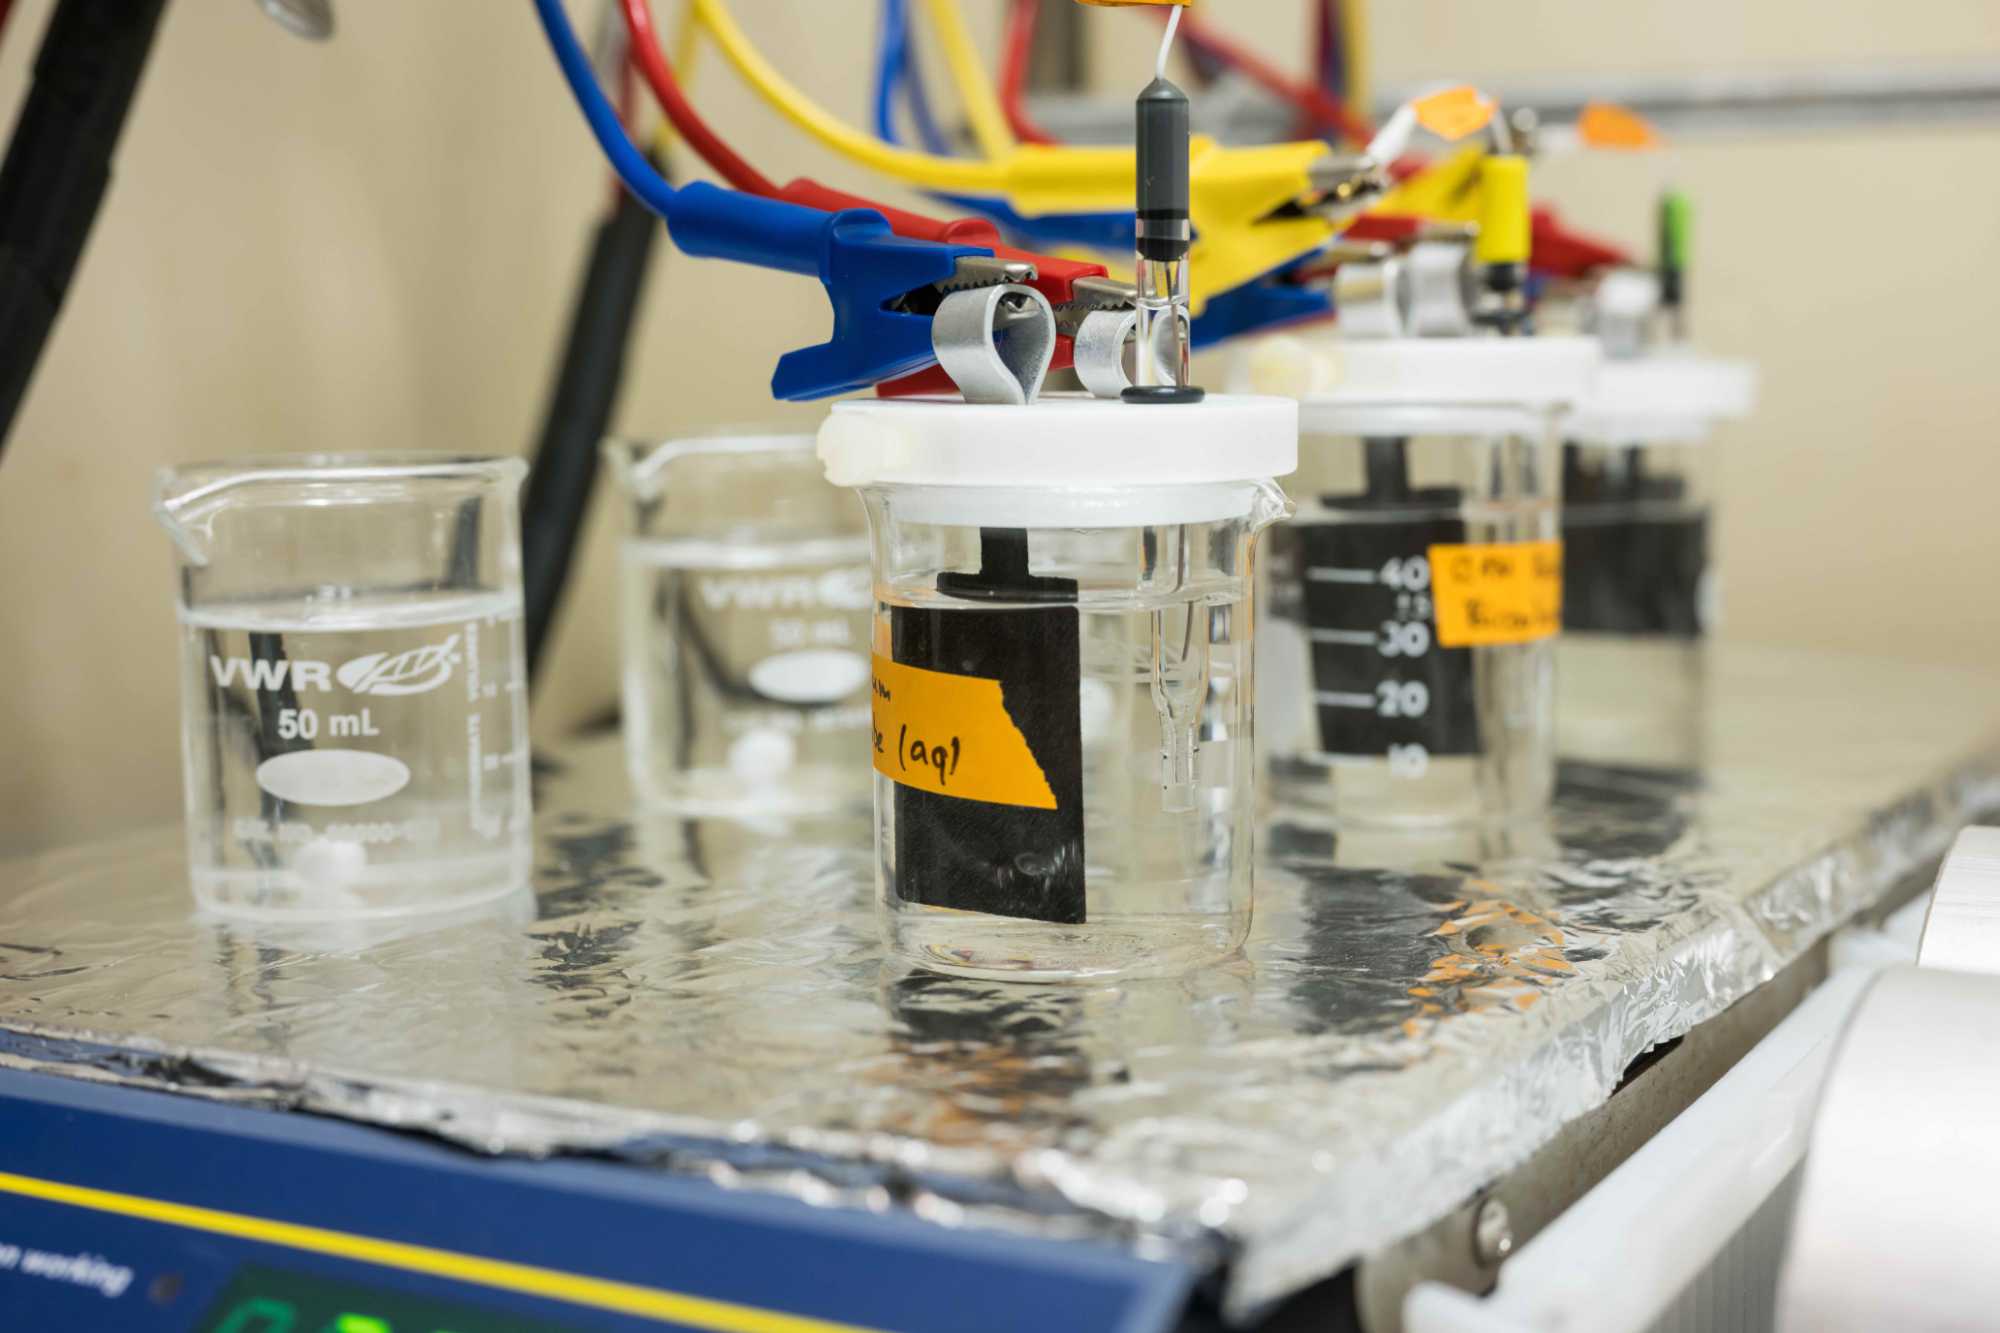 PFAS chemical remediation depicted with five beakers filled with water and hydrophilic carbon paper with blue, red, and yellow wires and jumper cable-style clamps affixed to them, all atop a scale covered with aluminum foil.